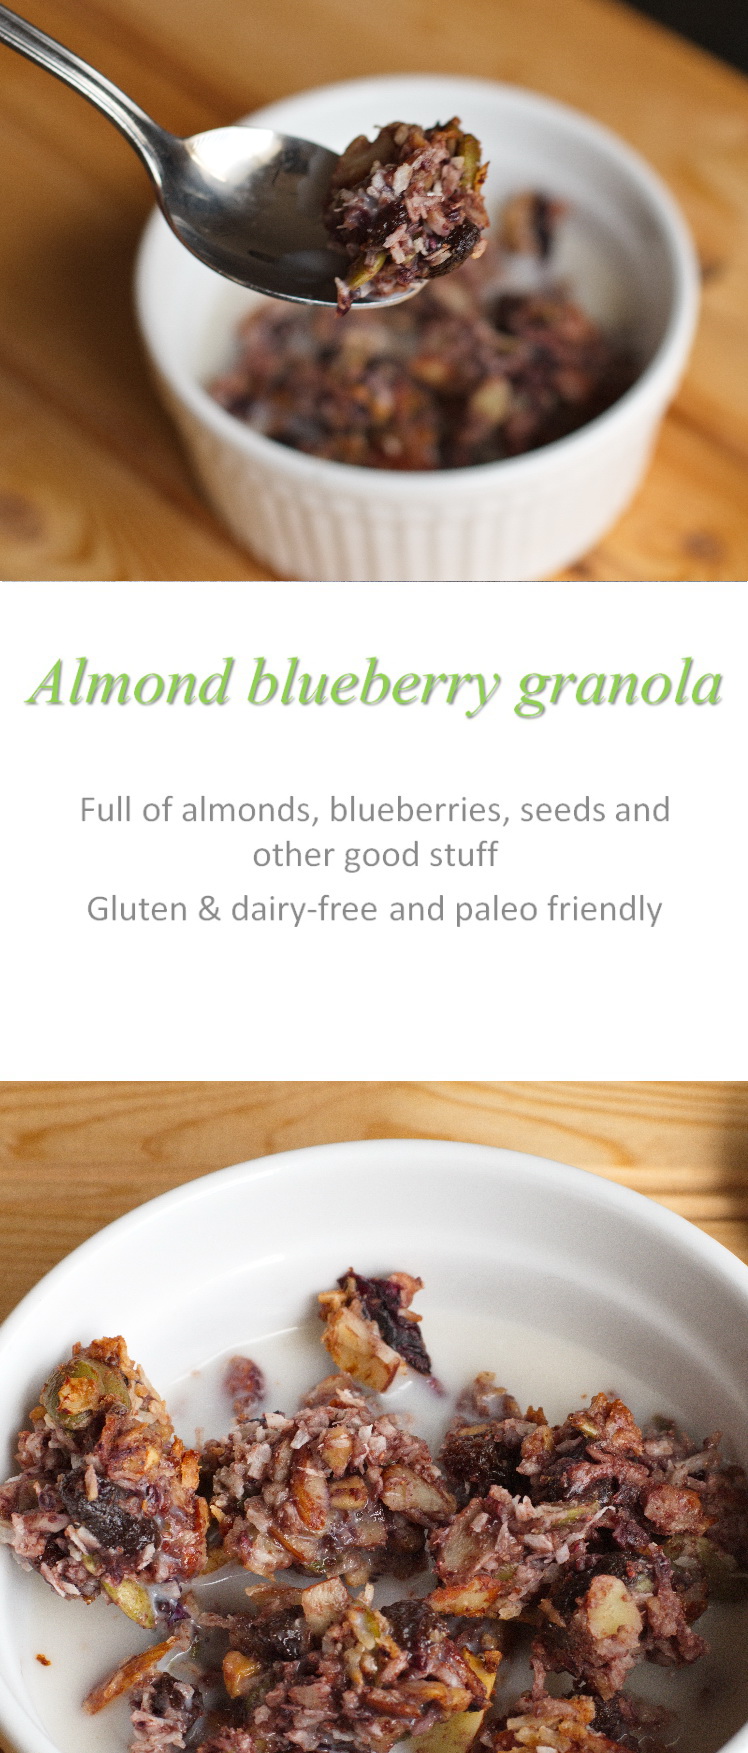 Almond blueberry granola made using almond butter and blueberry jam - gives this gluten and dairy-free granola a natural sweetness #granola